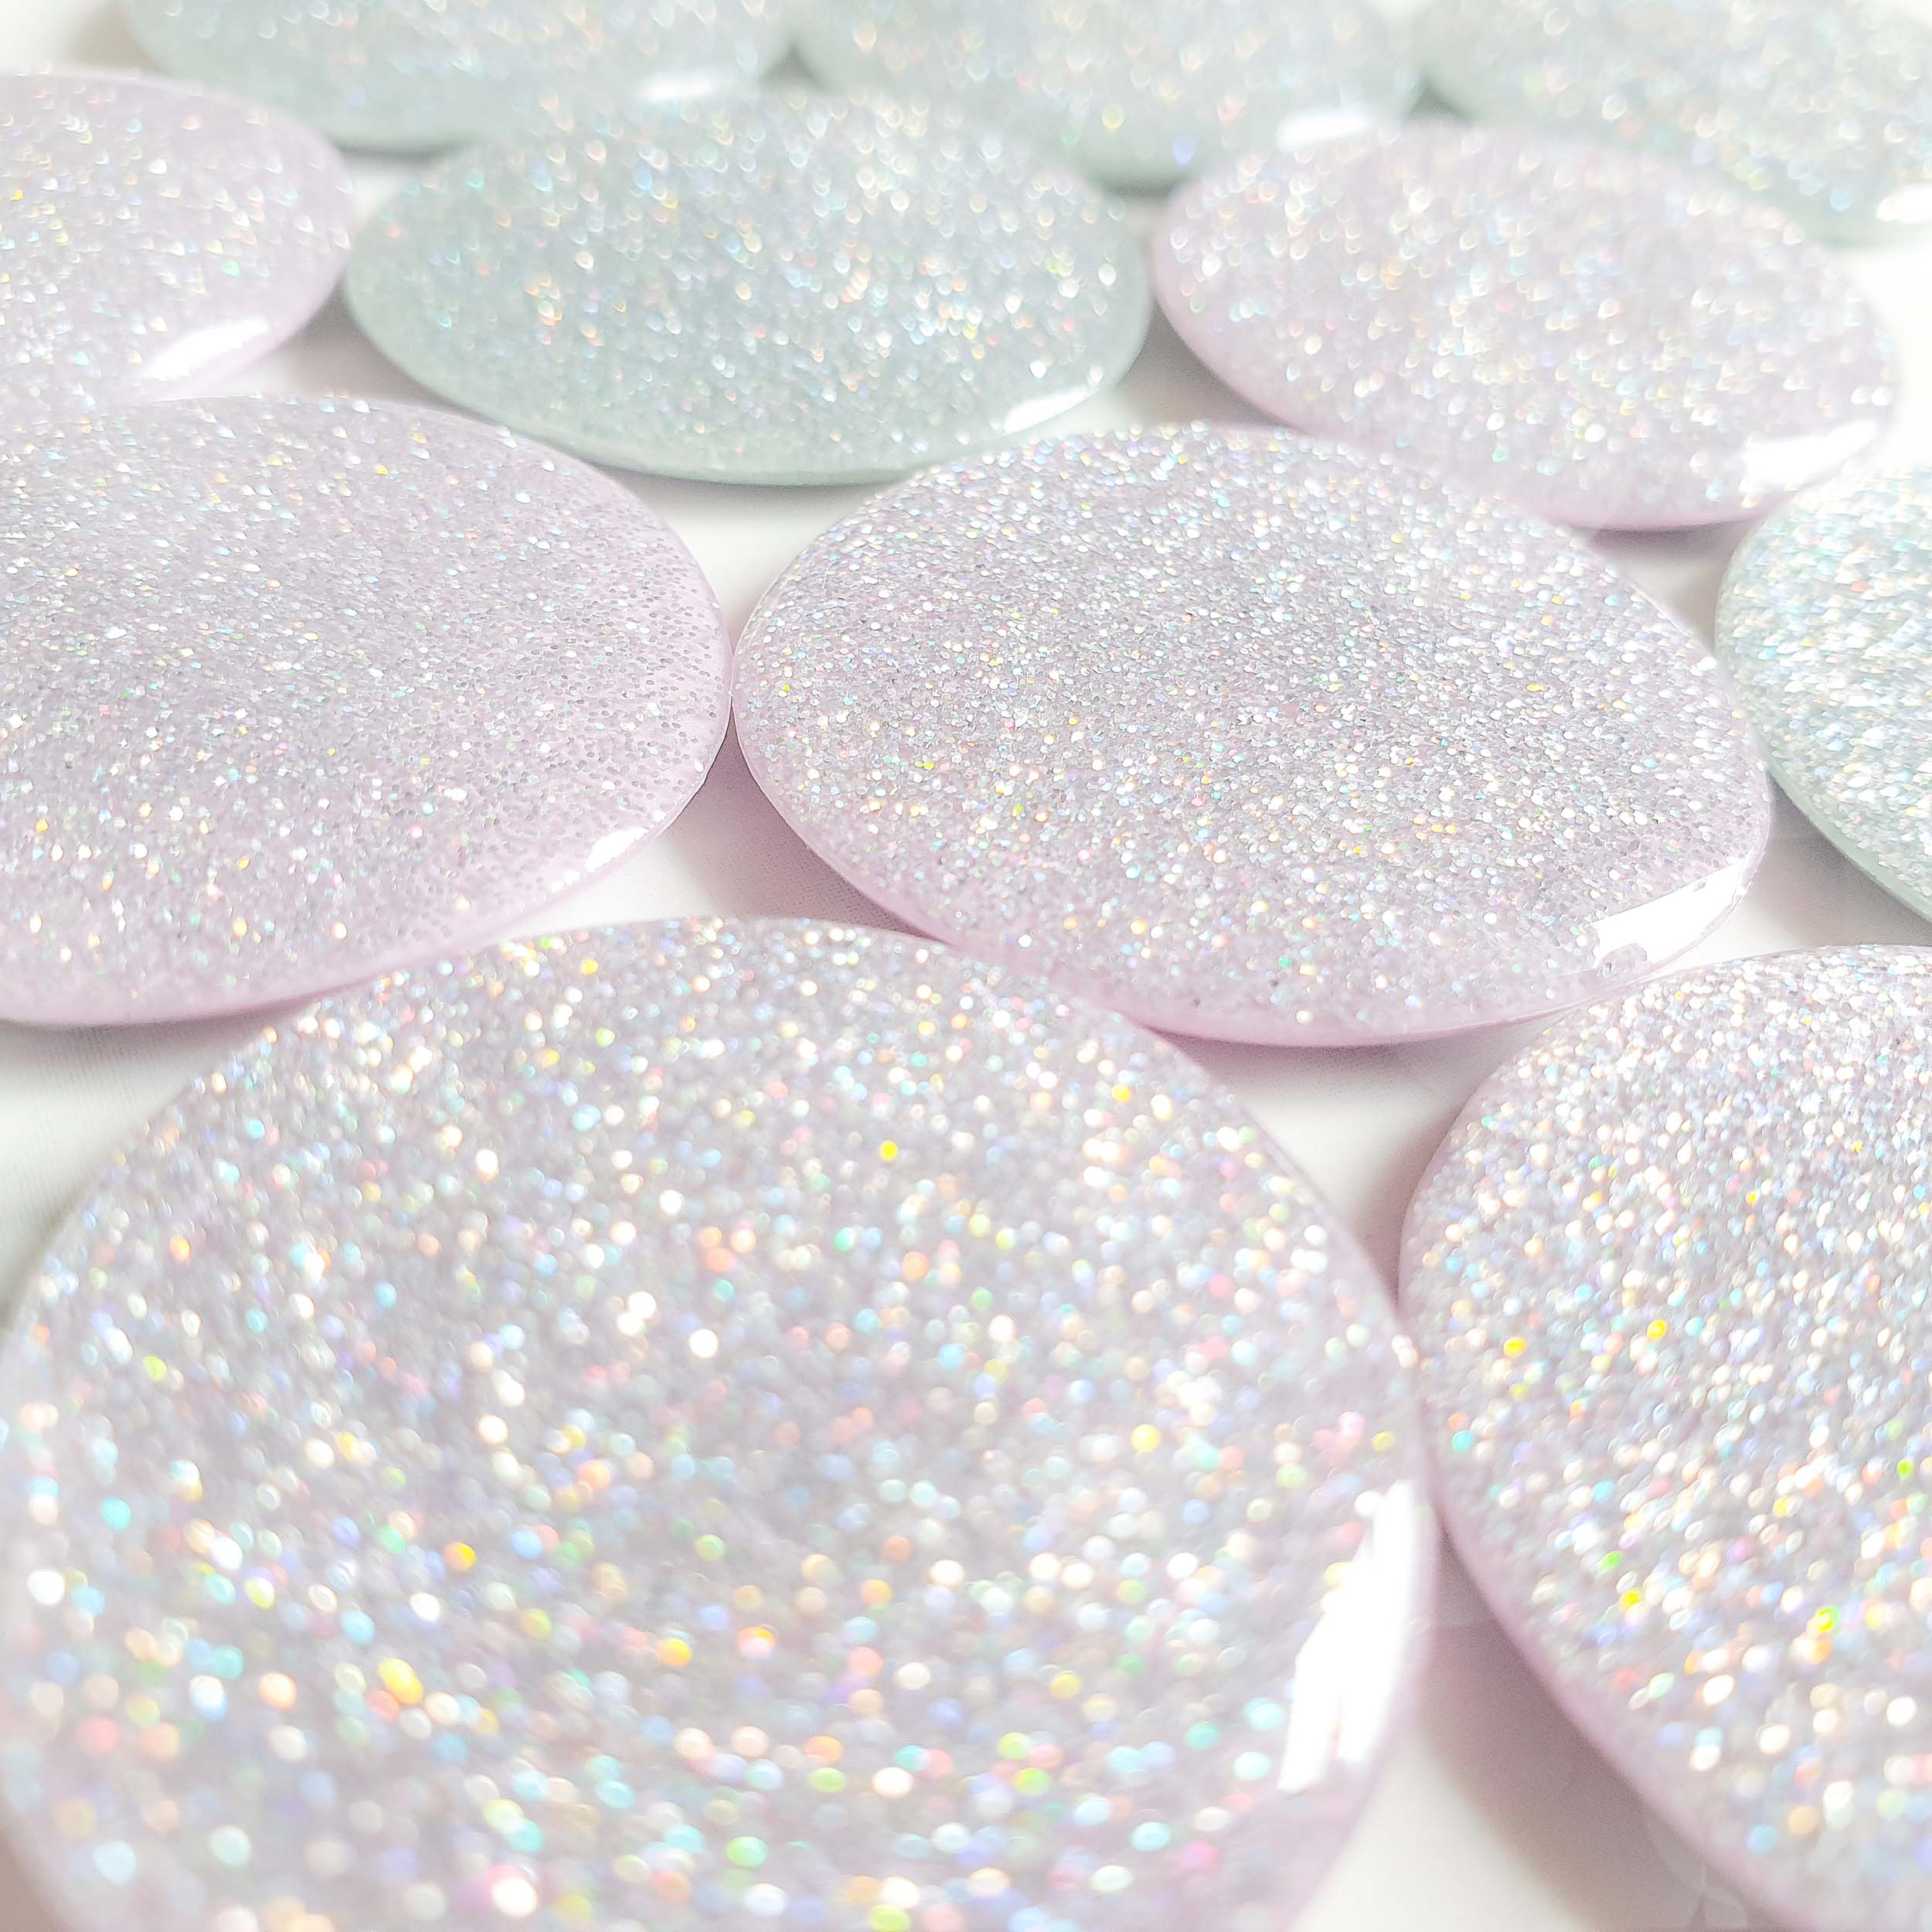 Terra Nova earring components in soft pastel colours with holographic glitter by Micky made it